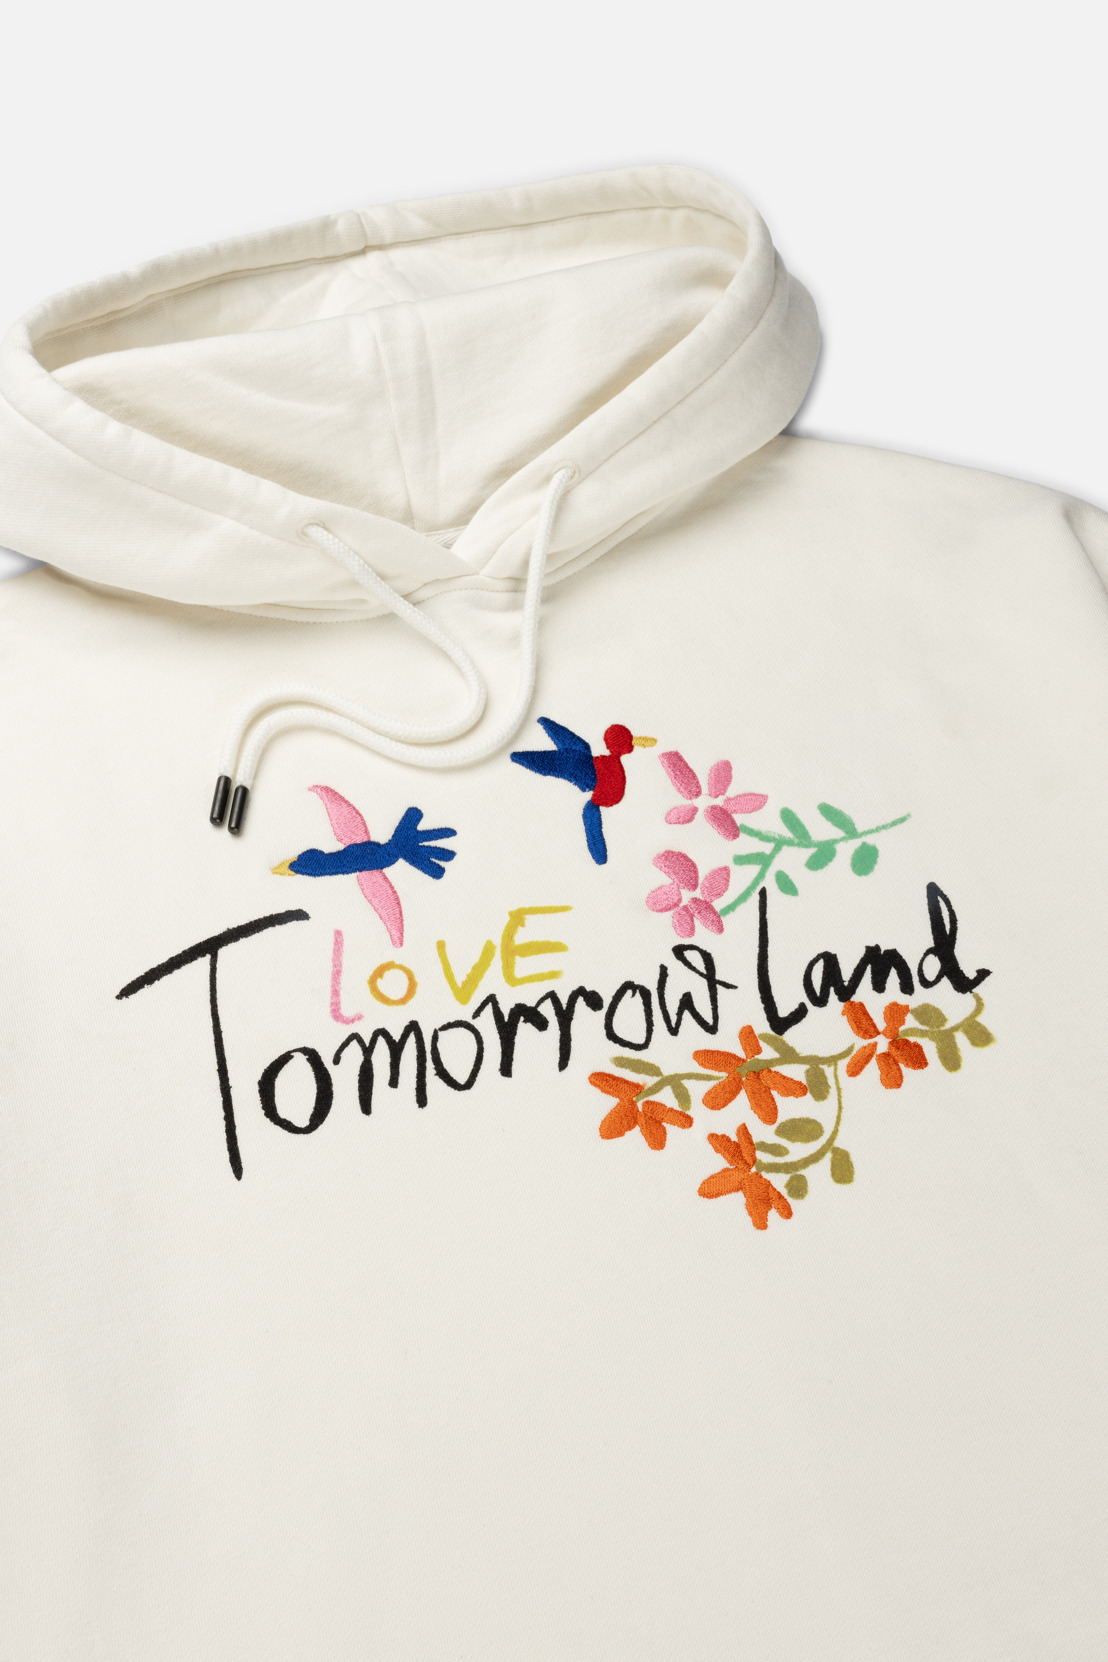 Discover the Tomorrowland Foundation Collection